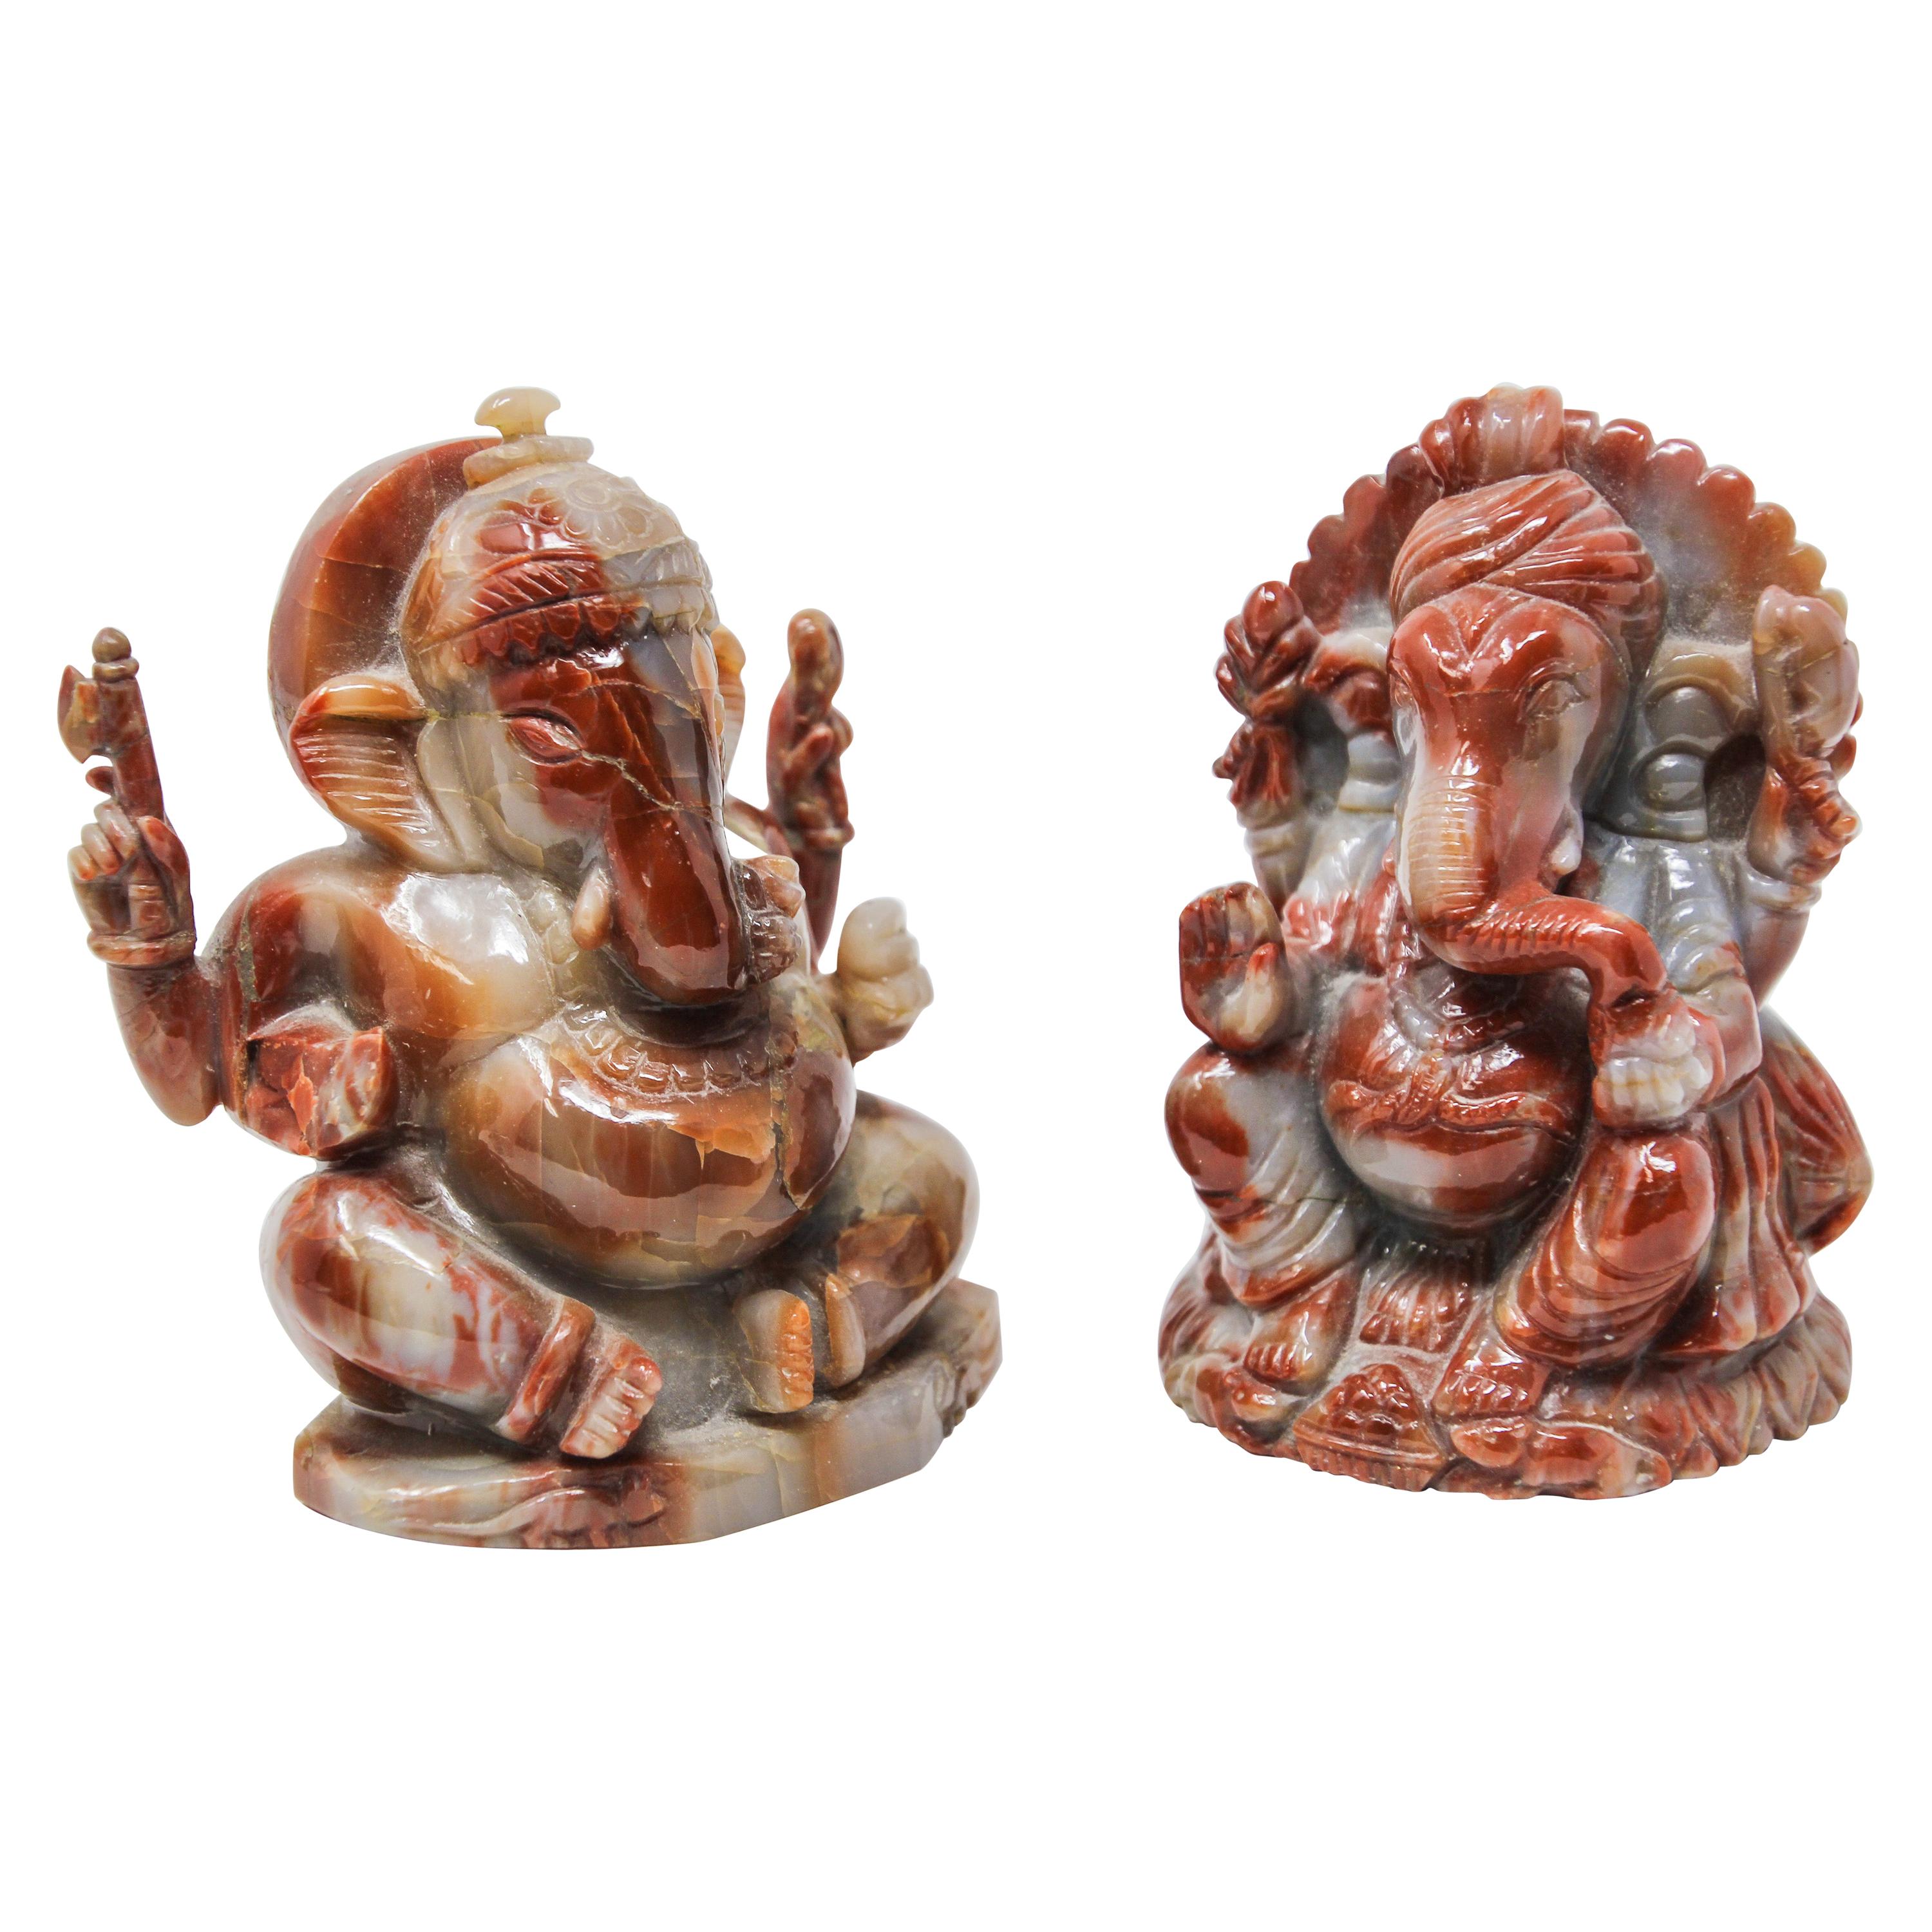 Two Stones Ganesh Hindu Diety Statues For Sale